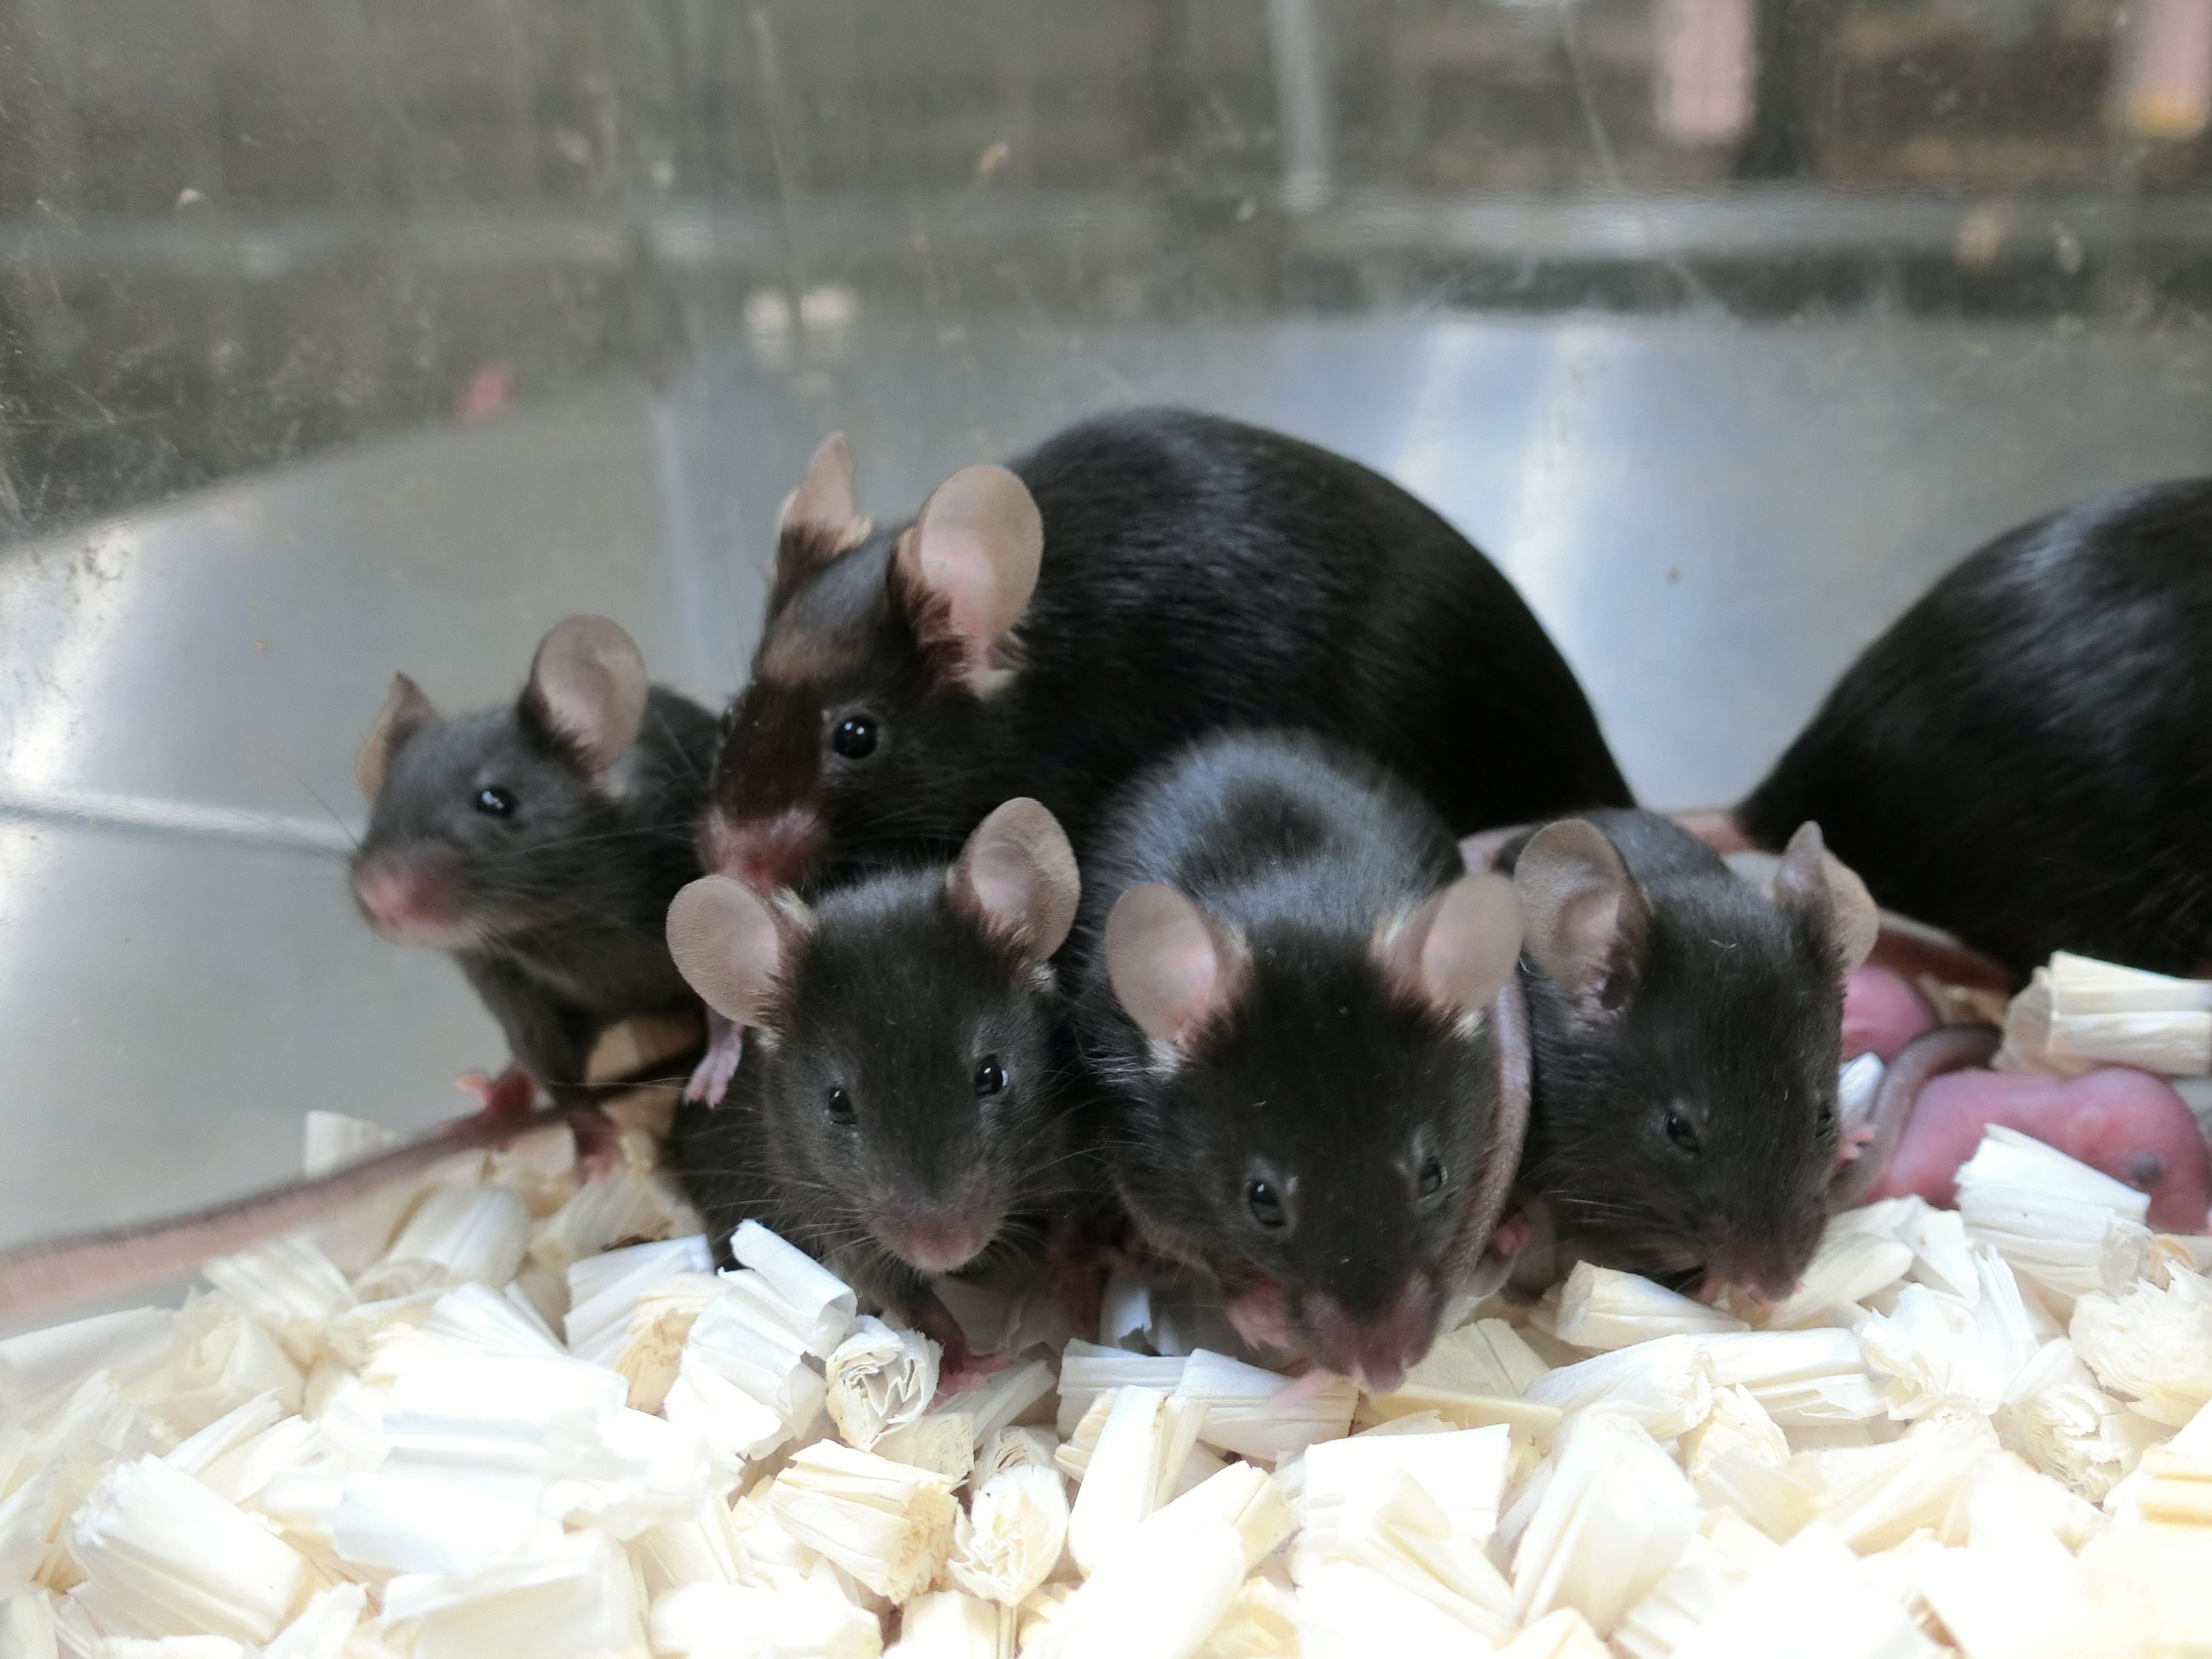 Pioneering space reproduction research yields healthy baby mice